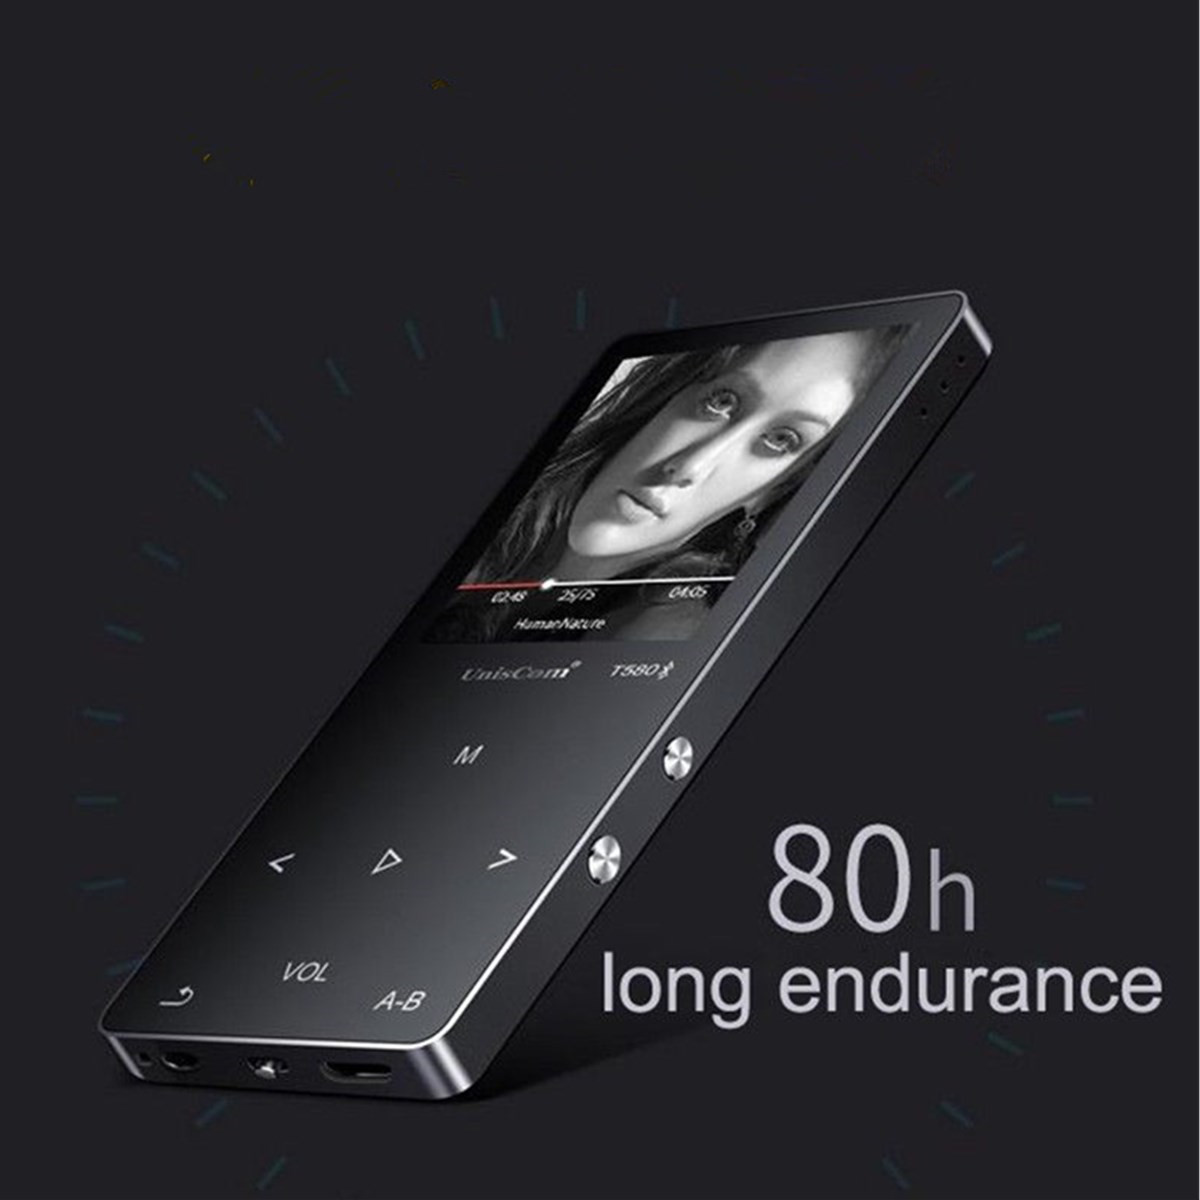 Uniscom 8G 1.8 Inch Screen bluetooth Lossless HIFI MP3 Music Player Support A-B Repeat Voice Record 15